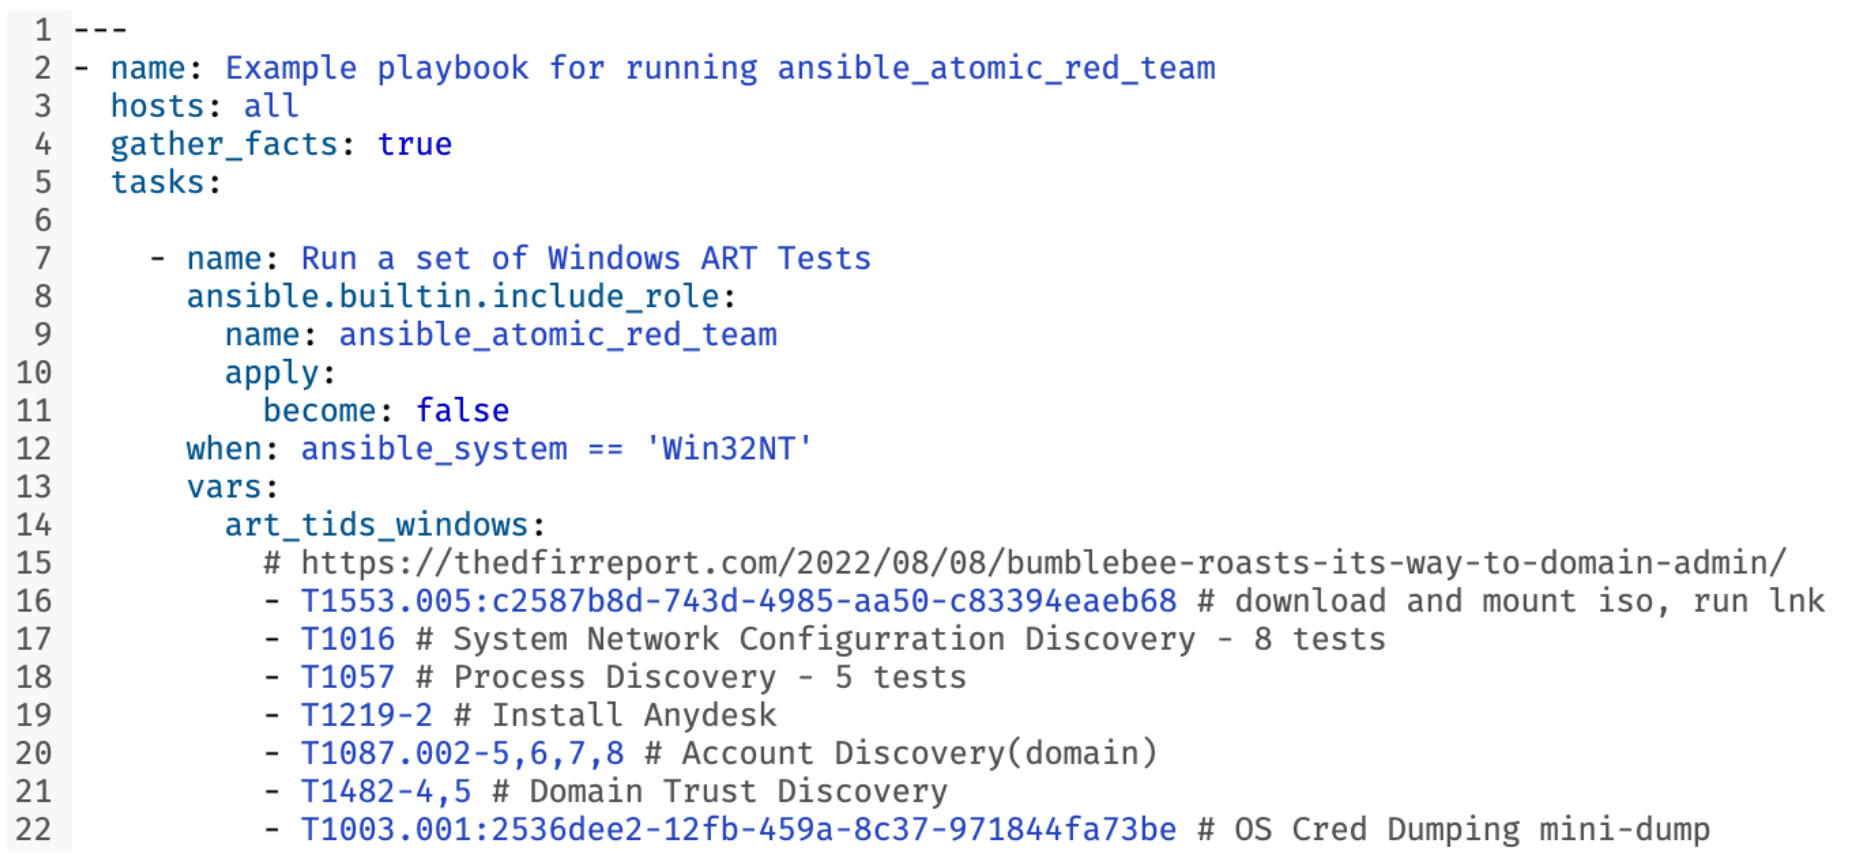 Example Ansible playbook using Atomic Red Team